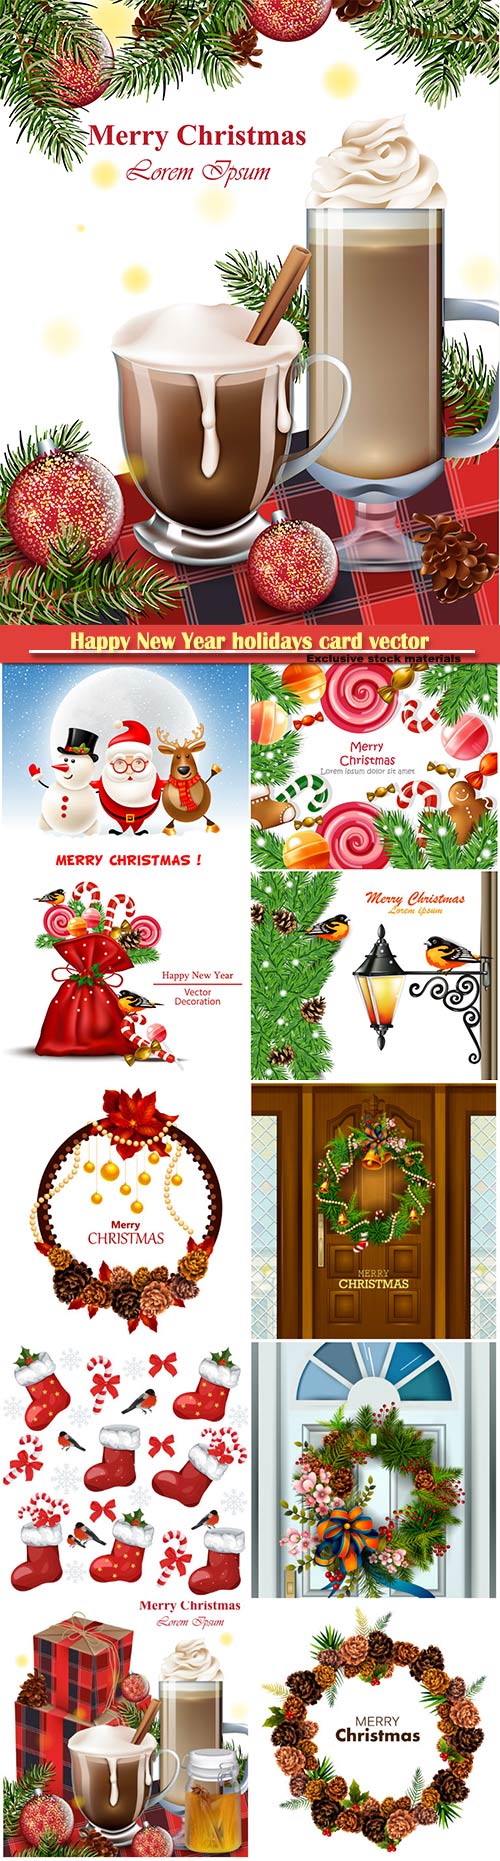 Happy New Year holidays card vector background